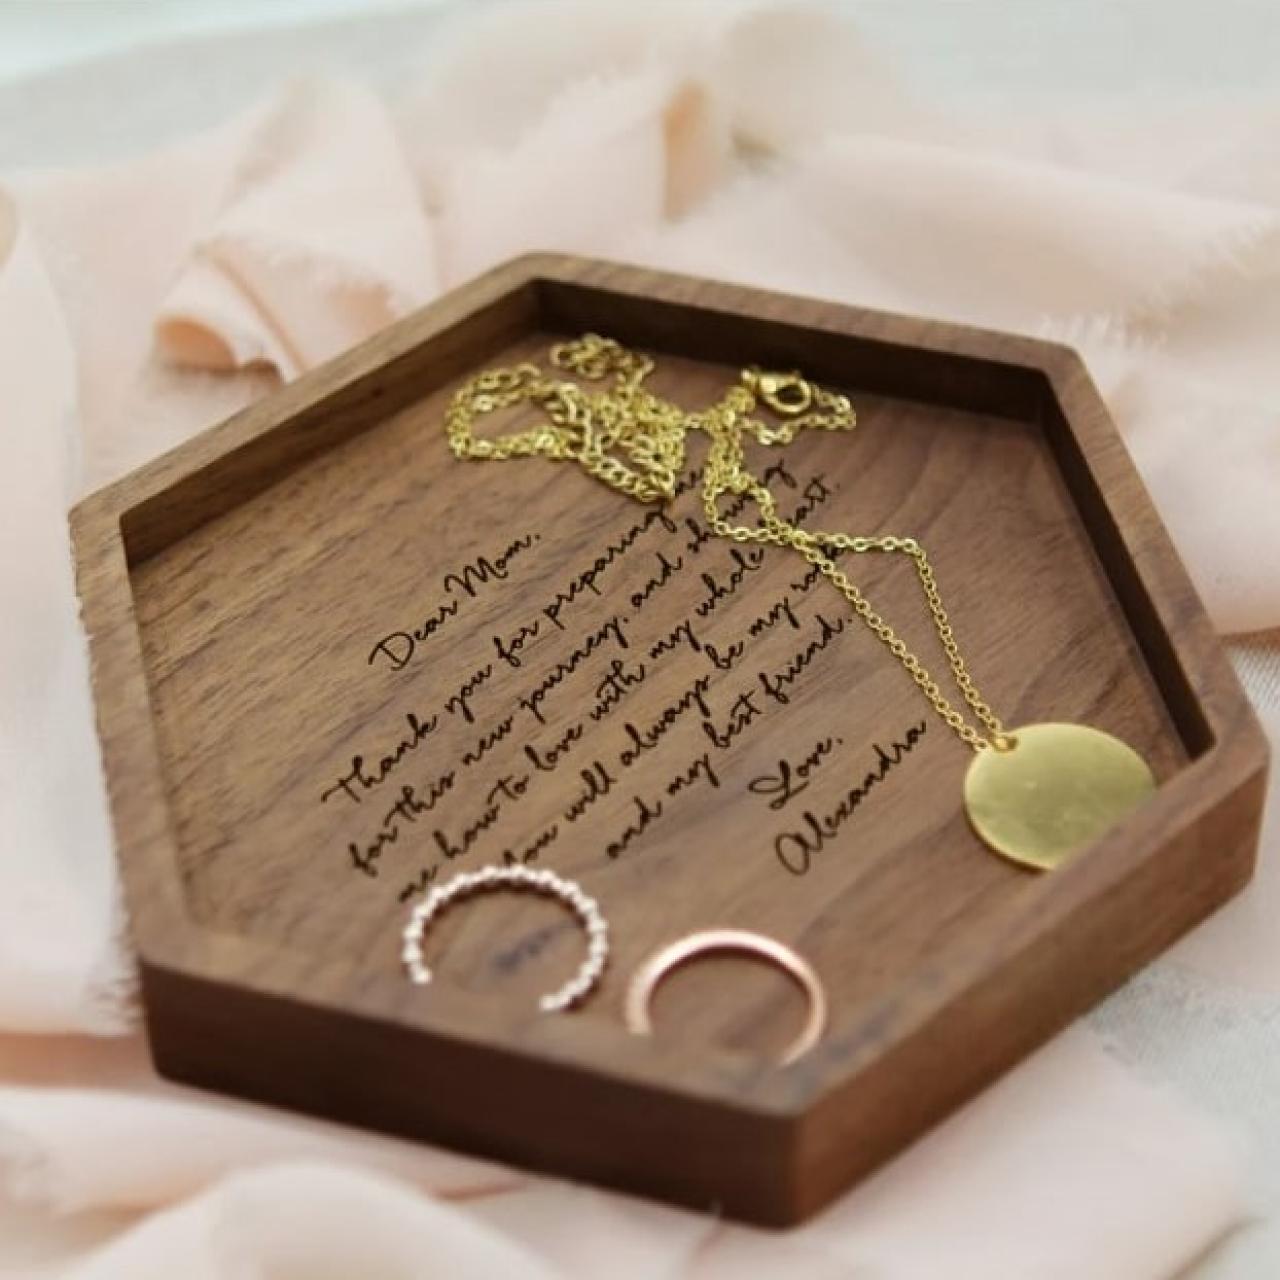 Mother of the Bride gift or the perfect push gift for a new mom! Capture  the gift of motherhood — Laurel Ellsworth Designs